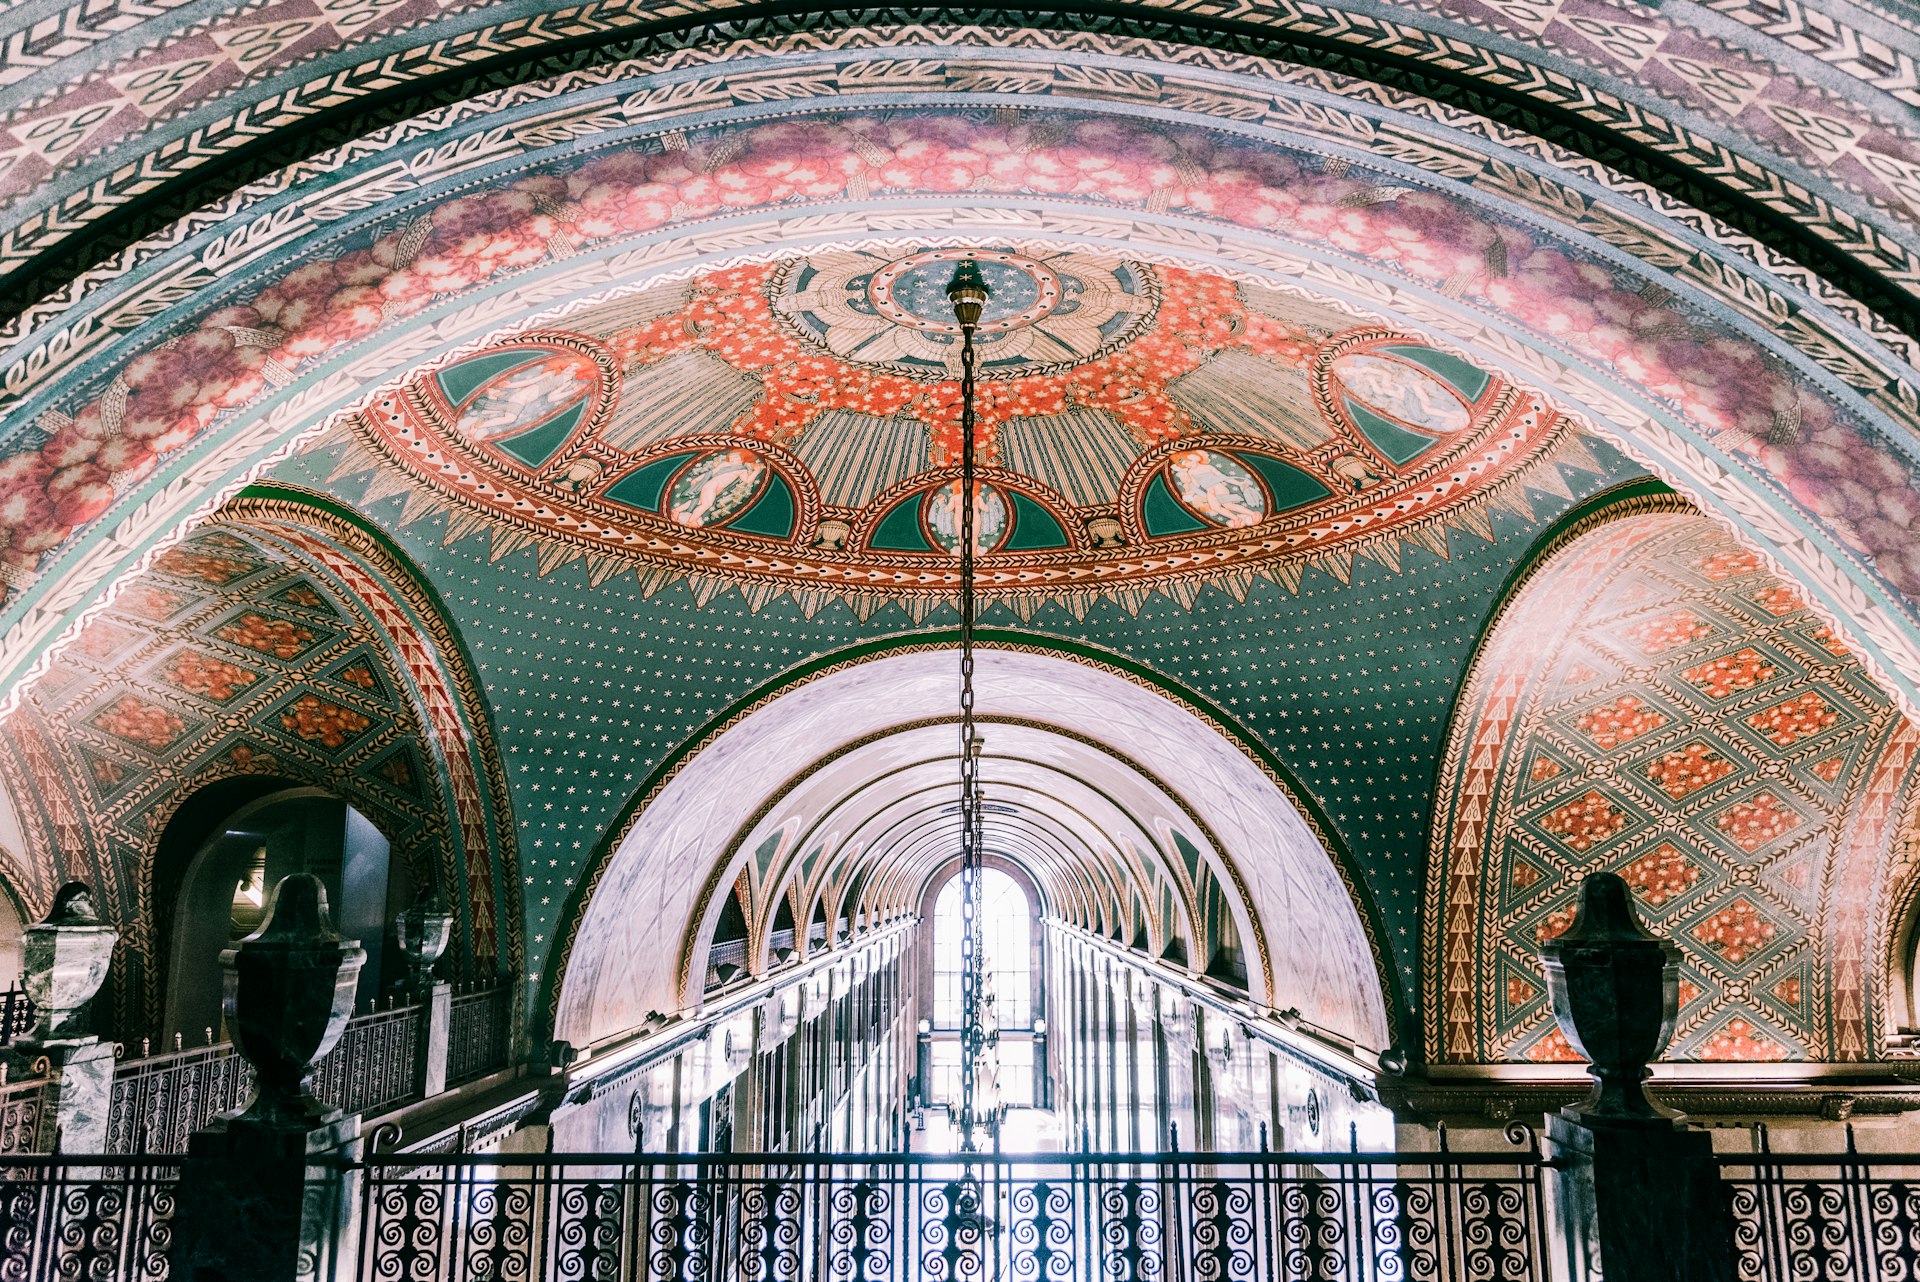 A colorful painted ceiling at the Fisher Building in Detroit